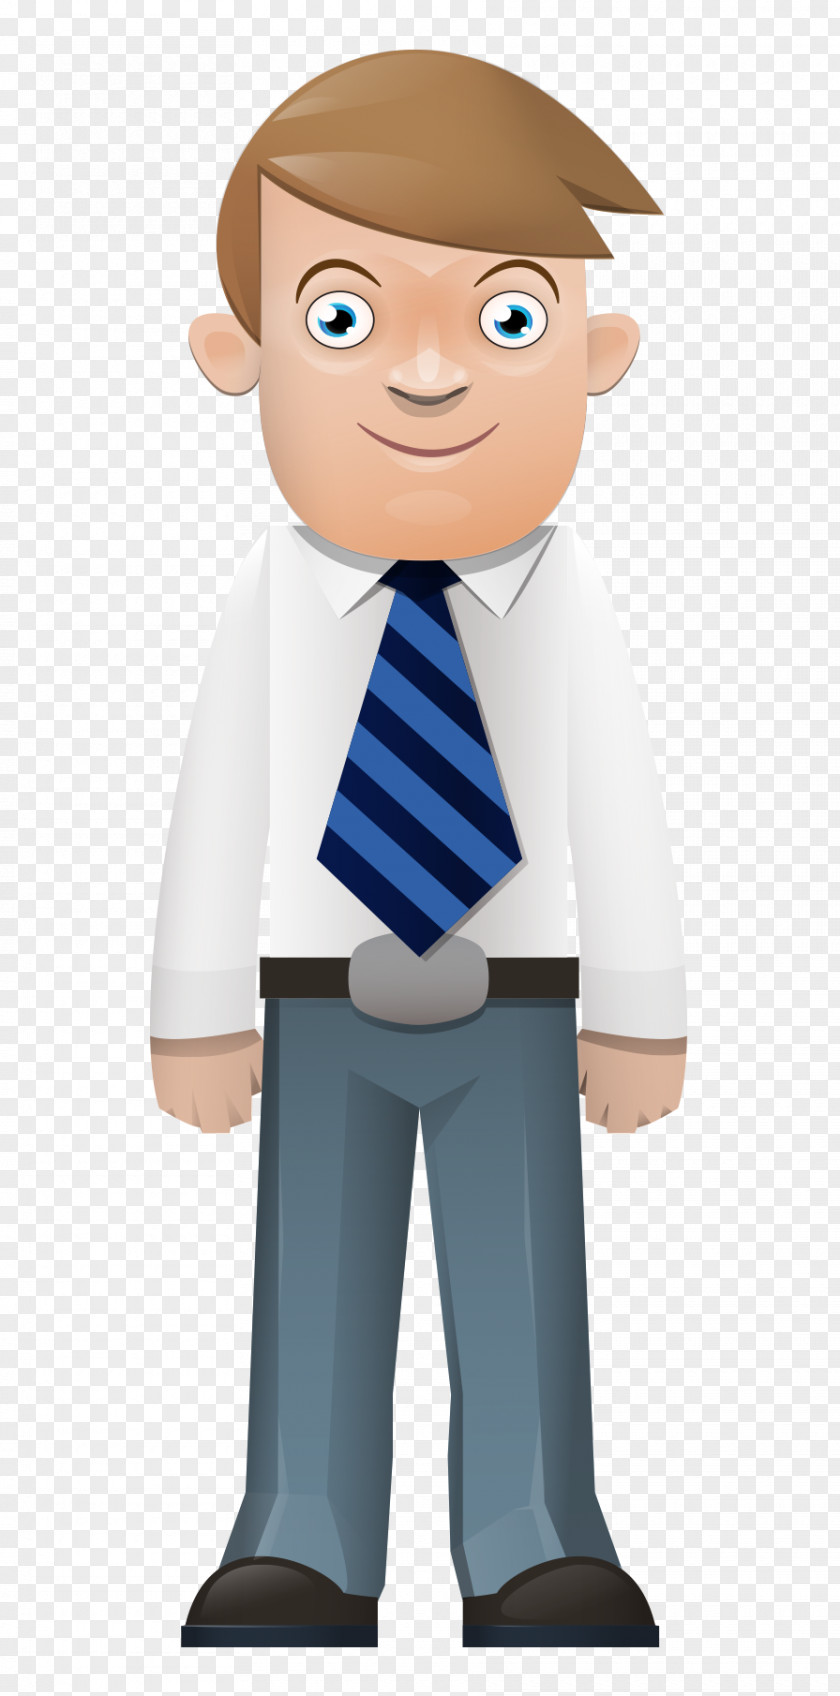 Hand-painted Cartoon Man Standing Front Tie Illustration PNG